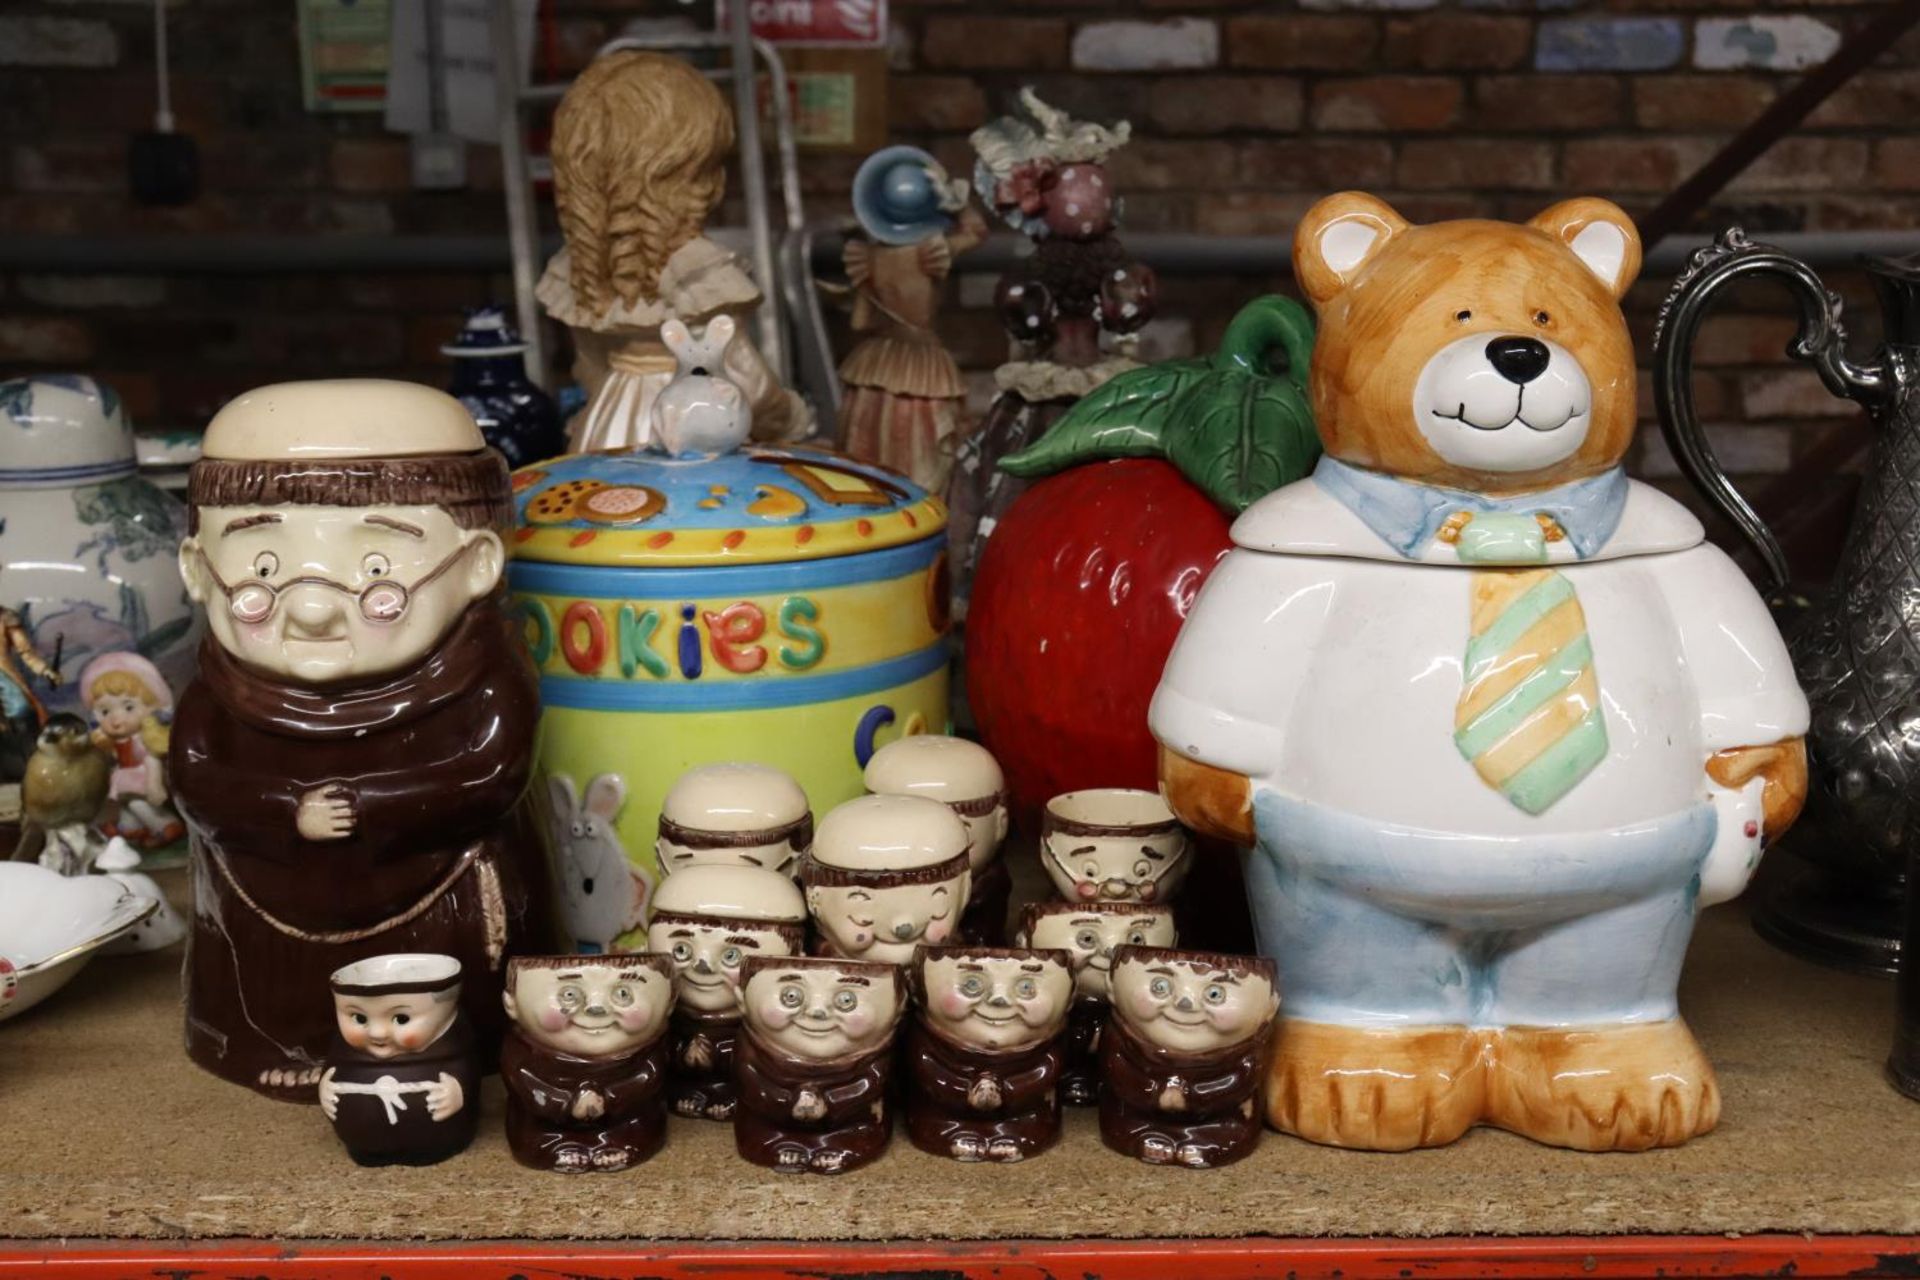 A COLLECTION OF ELEVEN 'WEISS' MONKS TO INCLUDE A STORAGE JAR, EGG CUPS AND CRUET SET, PLUS